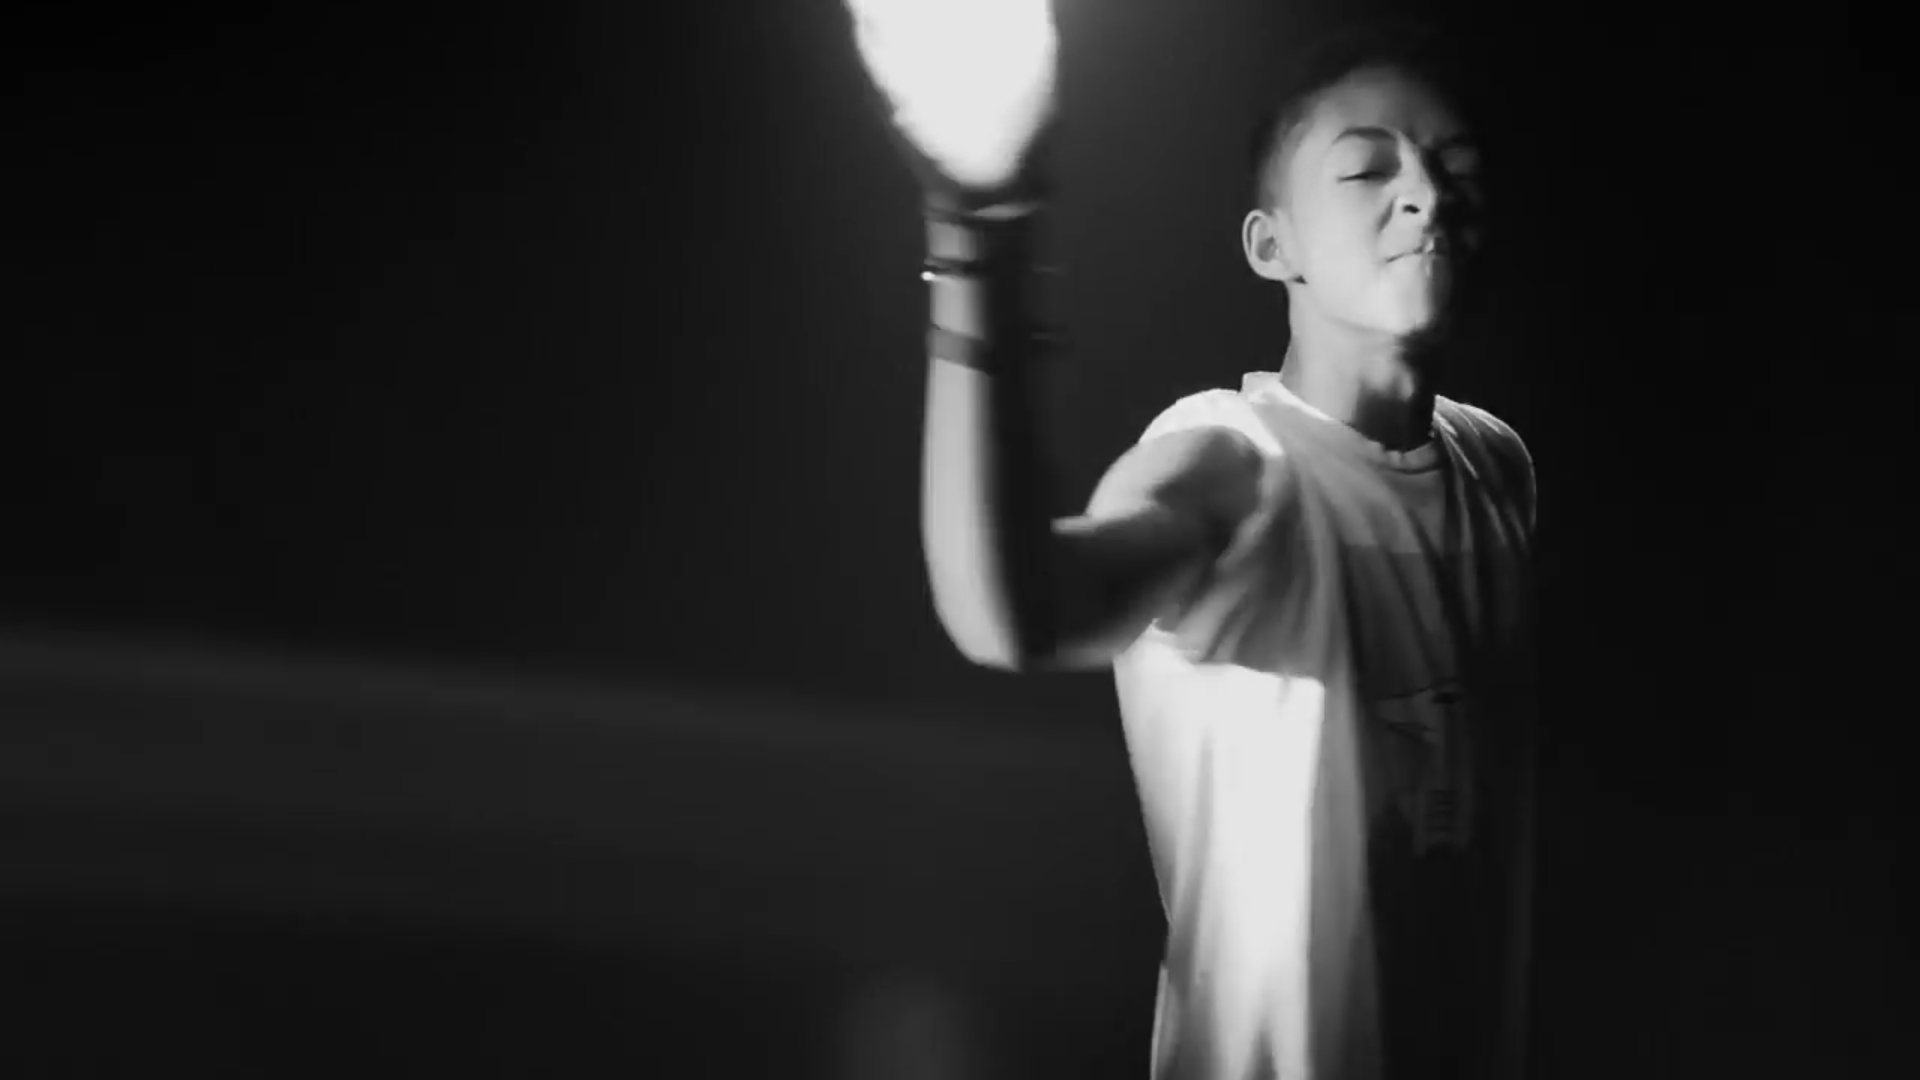 Picture Of Jaden Smith In Music Video Give It To Em Jaden Smith 1643440879 Teen Idols 4 You 1980